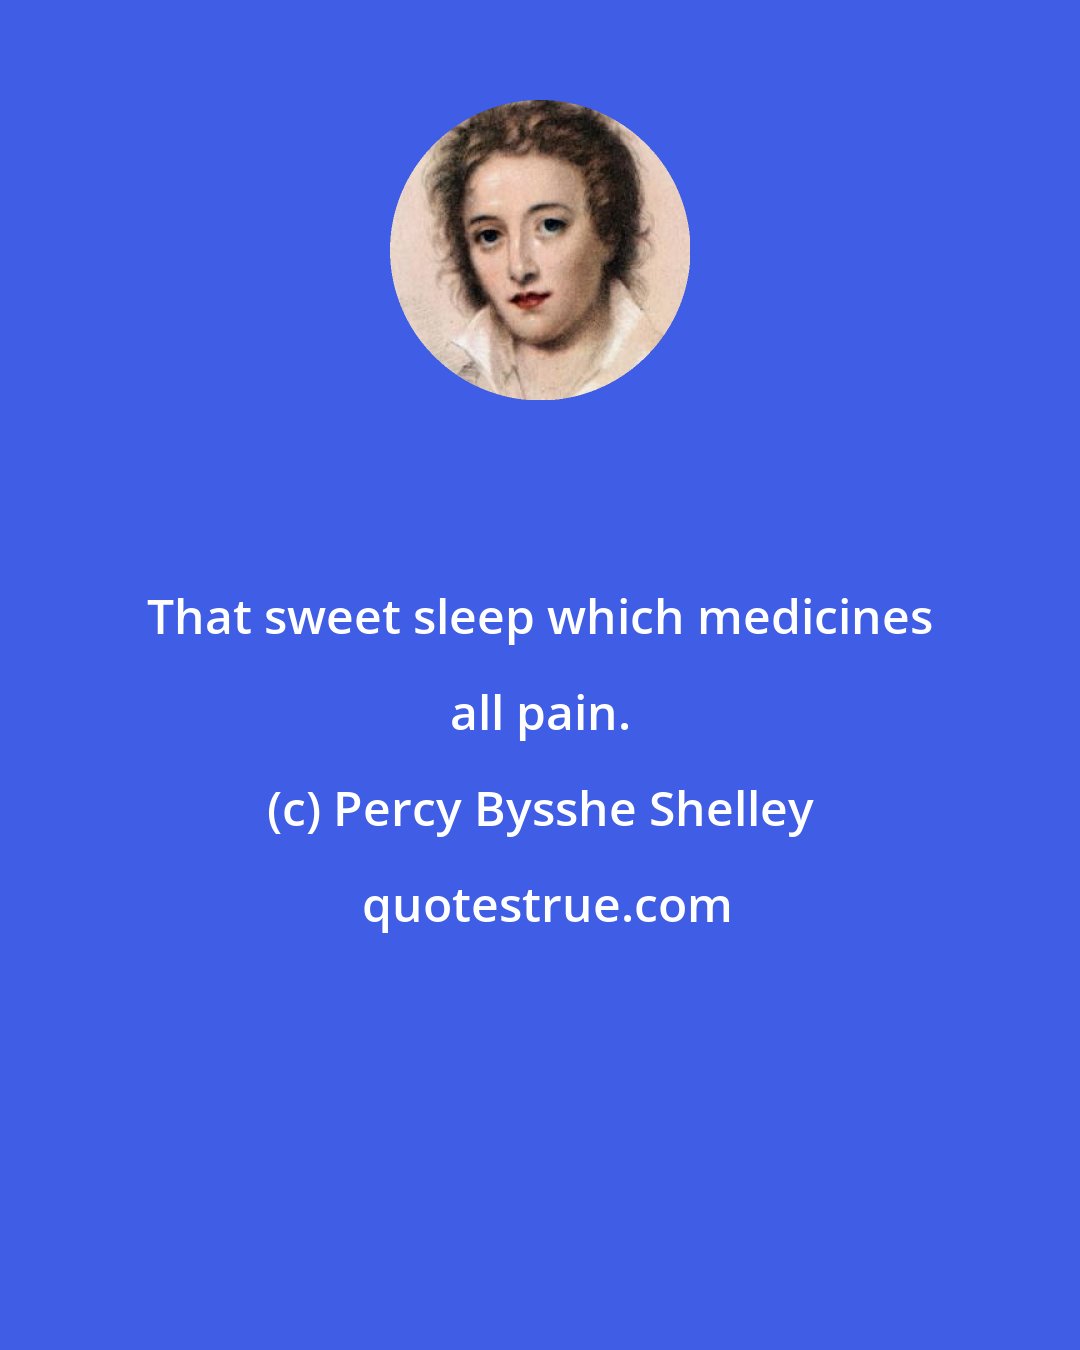 Percy Bysshe Shelley: That sweet sleep which medicines all pain.